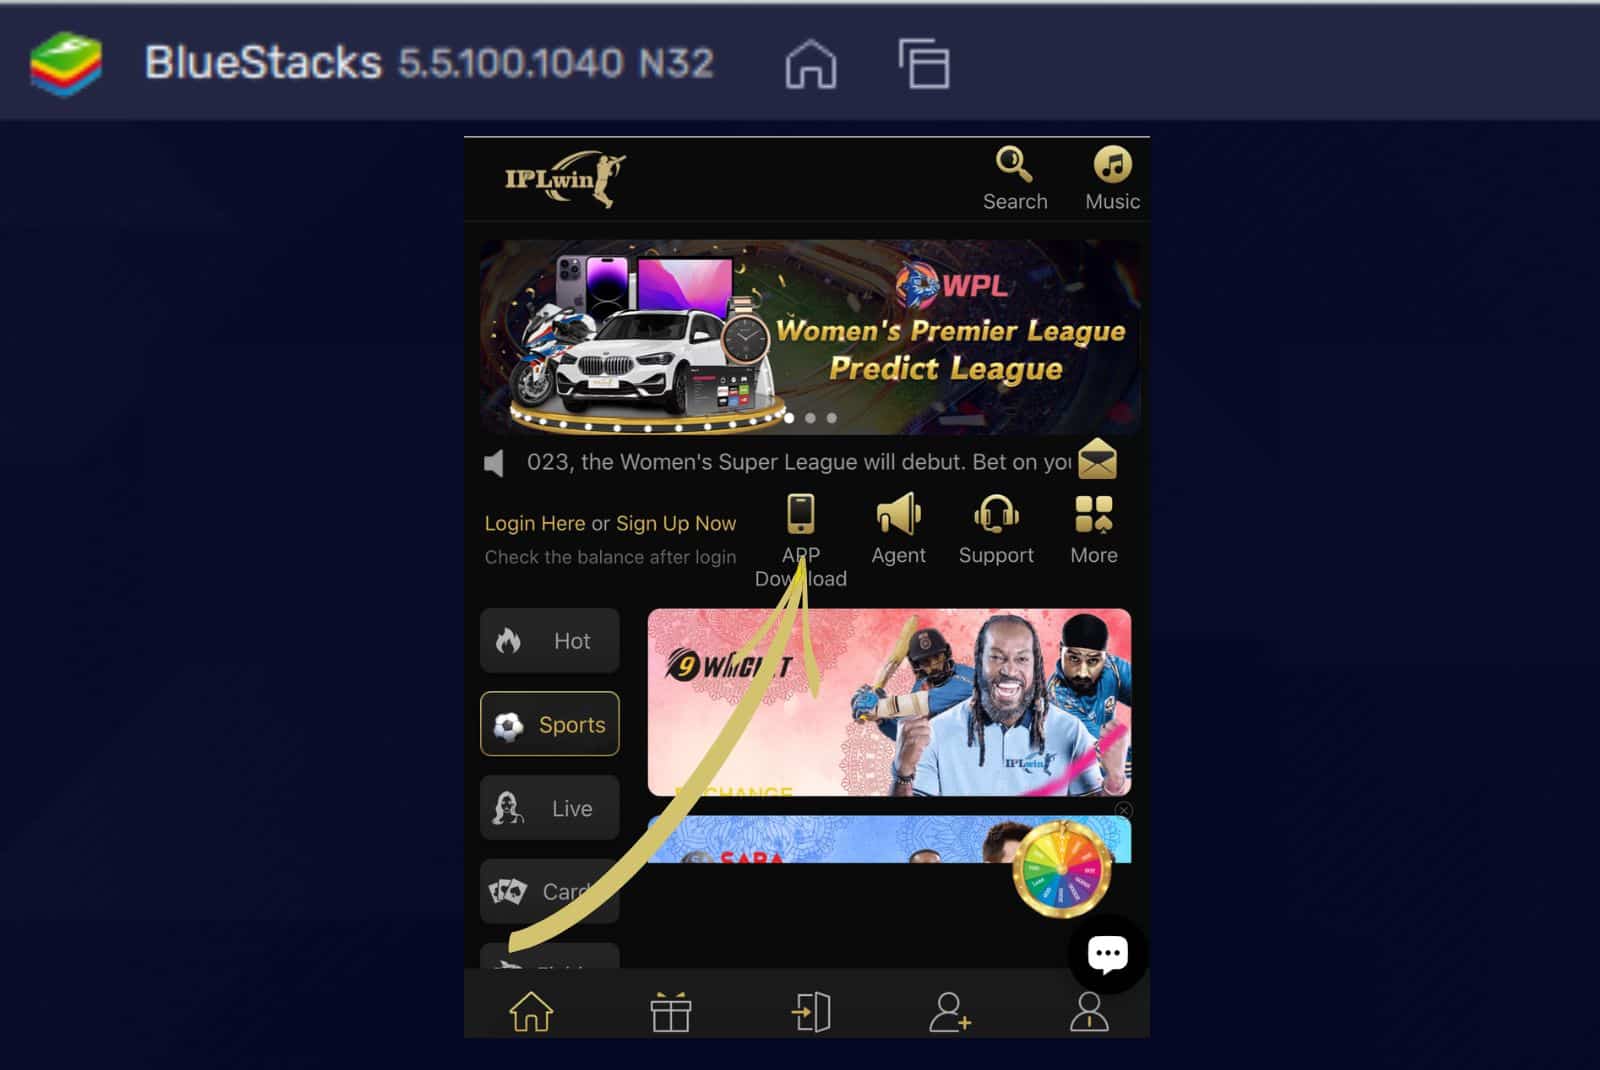 How to open Iplwin app on the PC with Bluestacks soft step